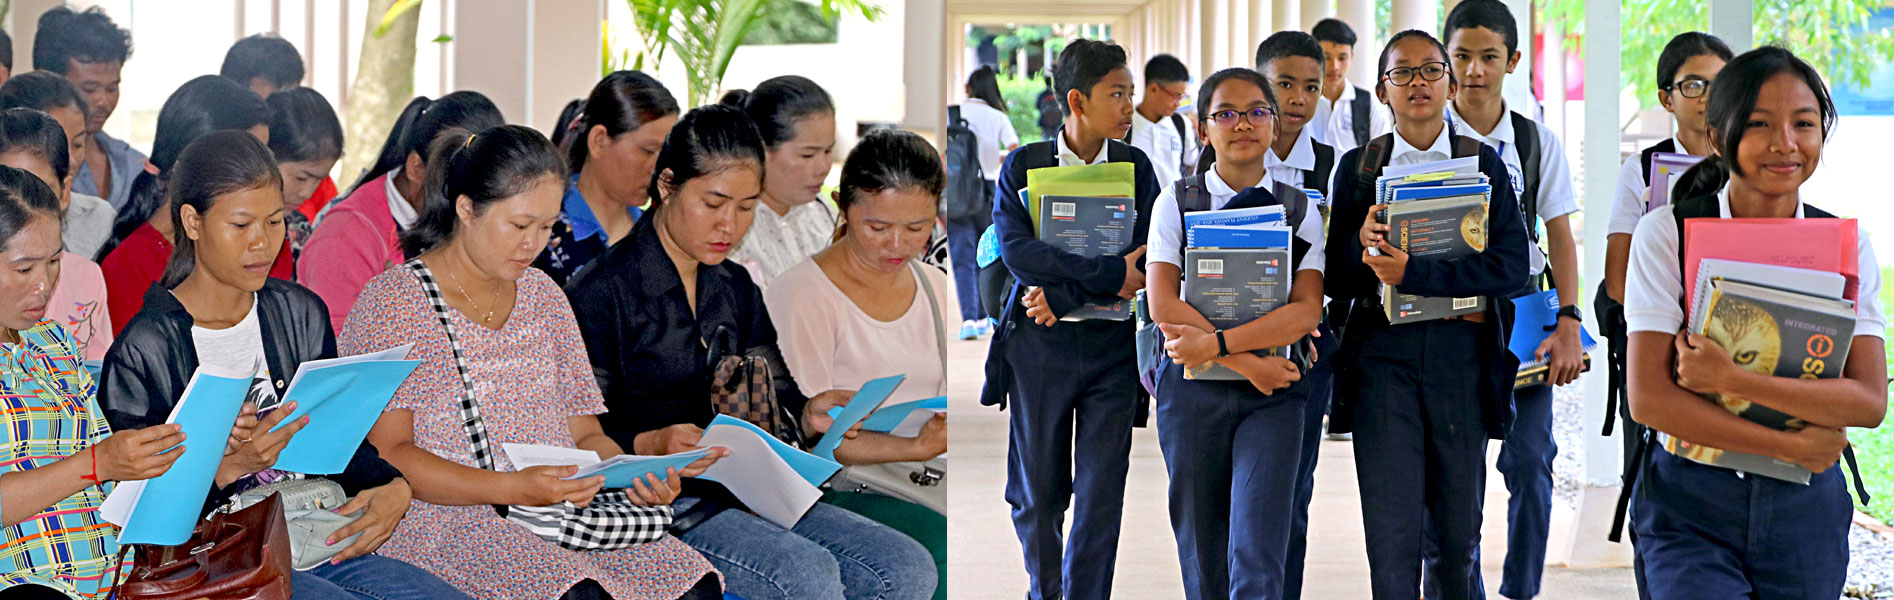 JPA parents and students on the first day of school - Back to school. Jay Pritzker Academy, Siem Reap, Cambodia. Jay-Pritzker-Academy-Siem-Reap-Cambodia.